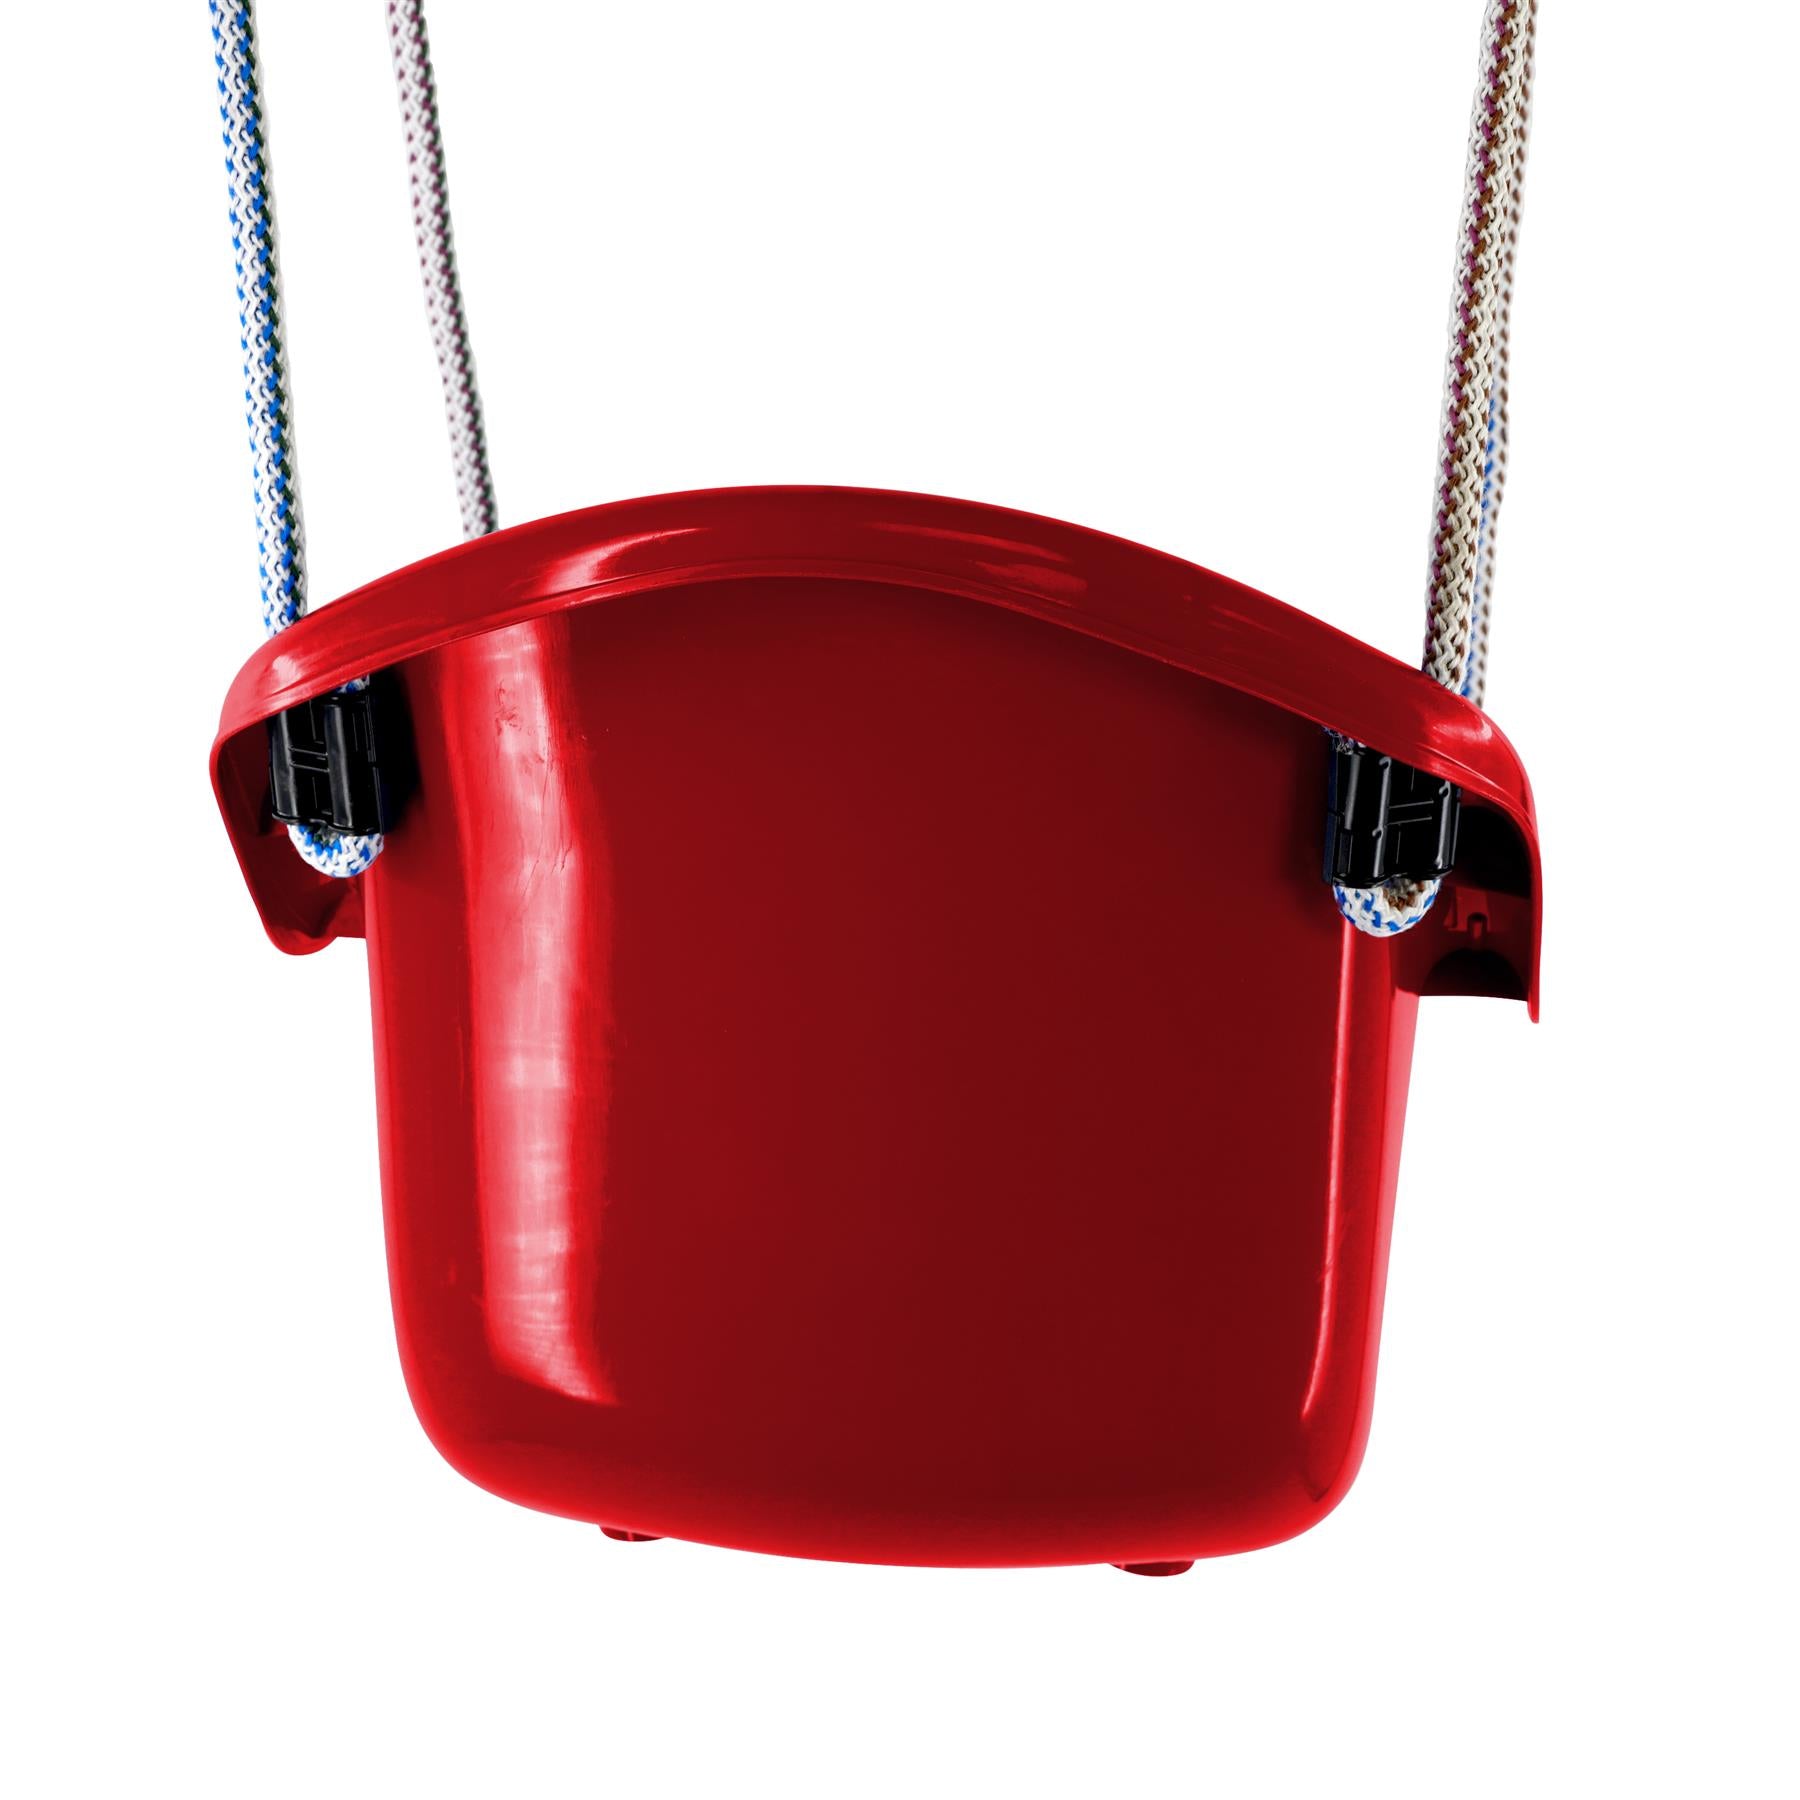 Red Children's Safety Swing Seat by MTS - The Magic Toy Shop